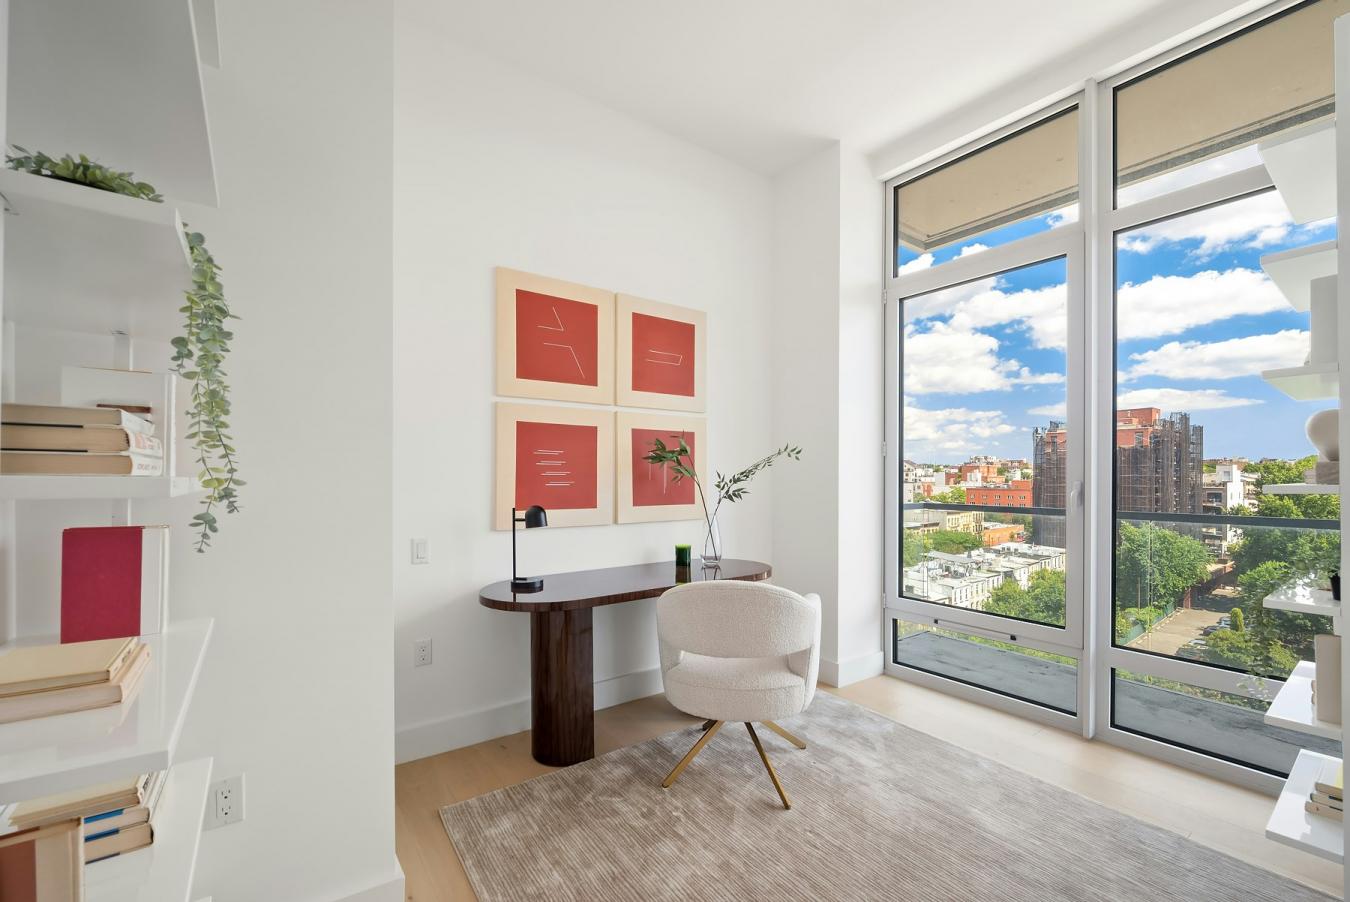 575 Fourth Avenue, Park Slope, New York, 11215, United States, 2 Bedrooms Bedrooms, ,2 BathroomsBathrooms,Residential,For Sale,575 Fourth Avenue,1484576